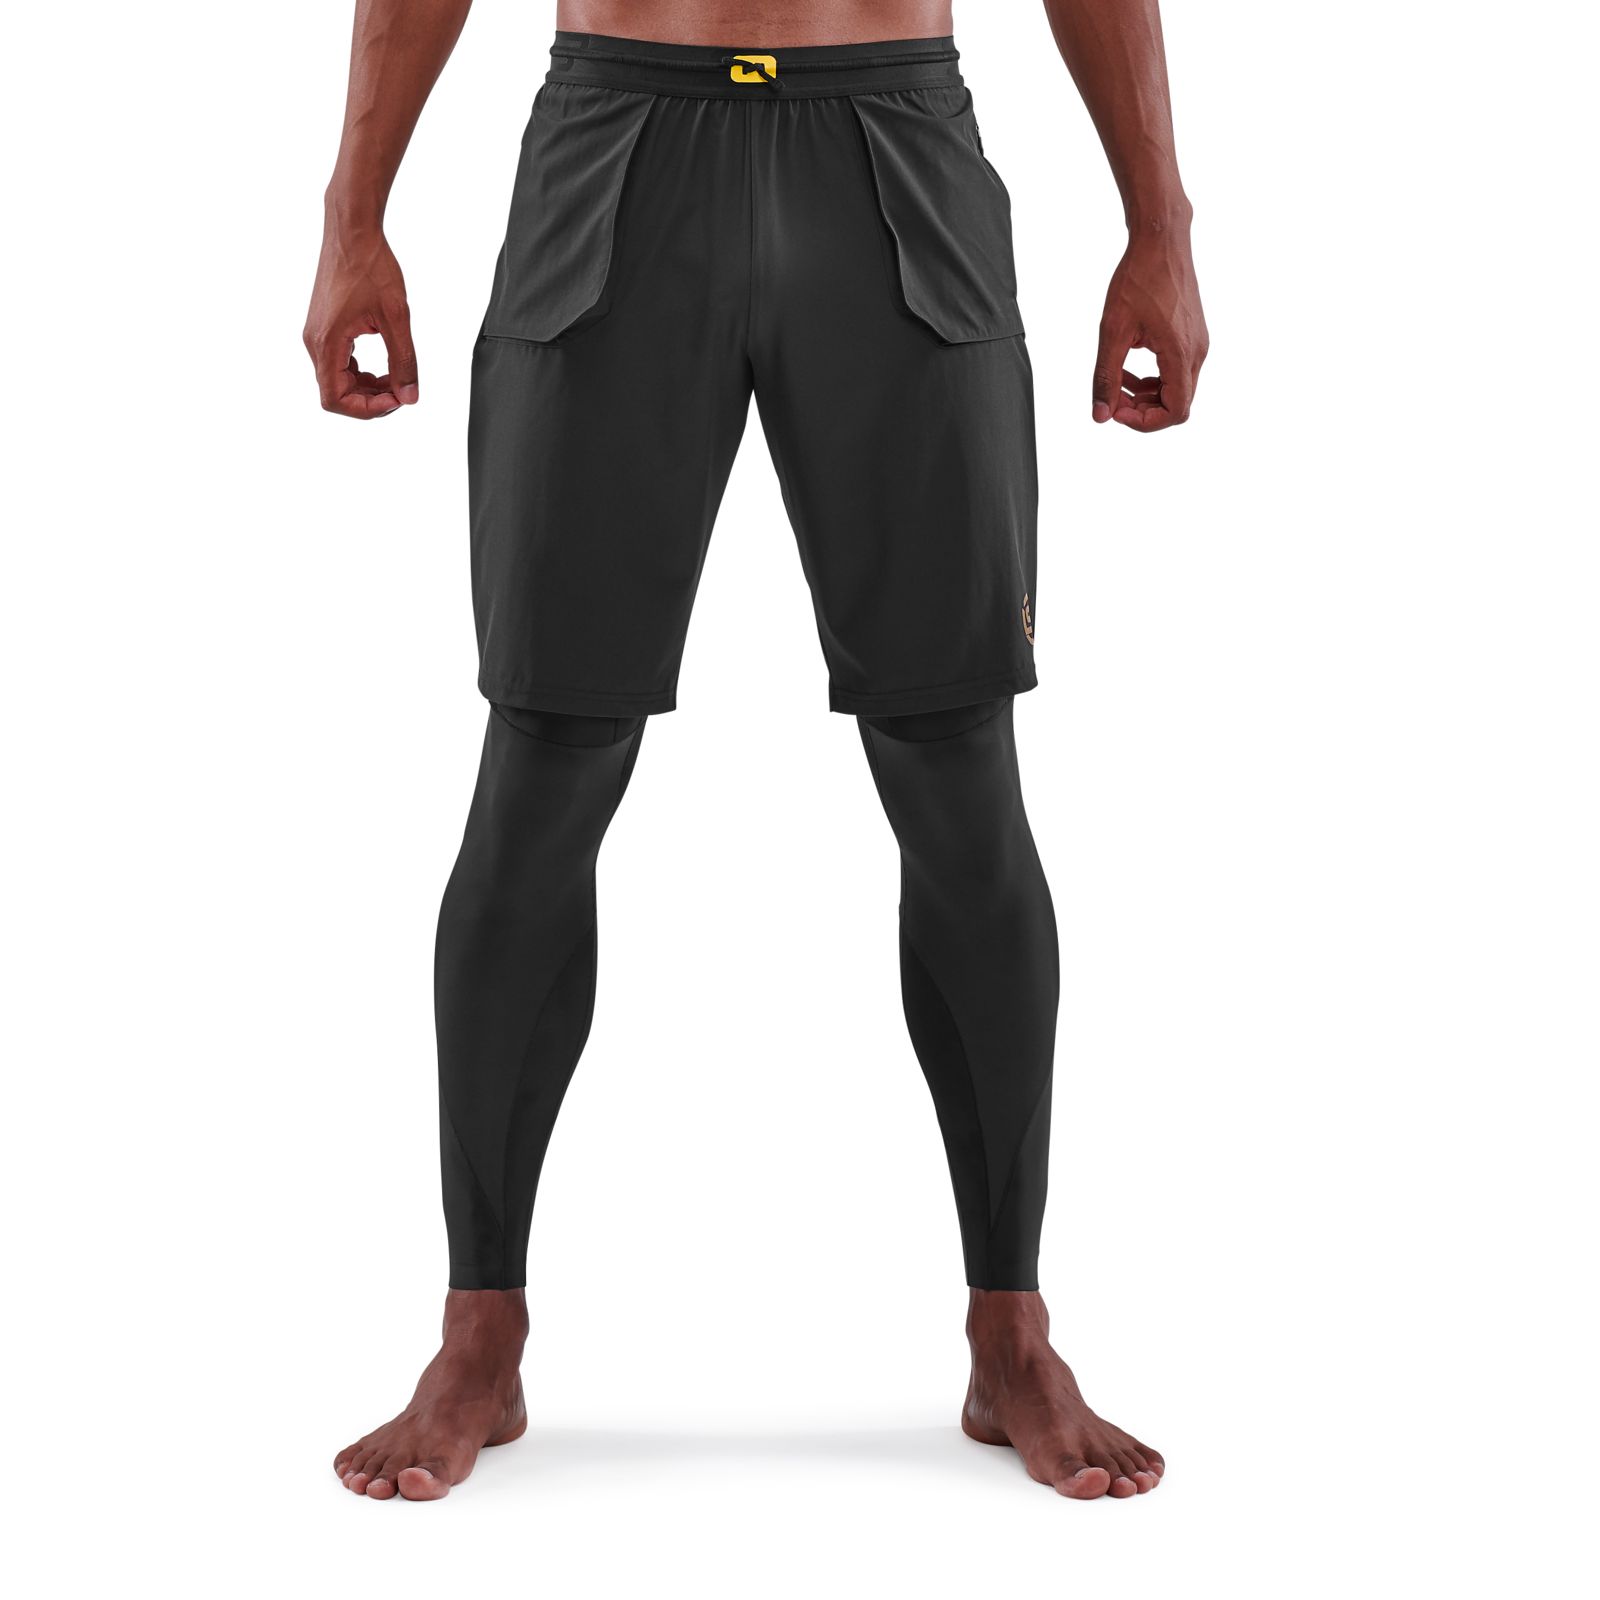 SKINS SERIES-3 MEN'S TRAVEL AND RECOVERY LONG TIGHTS CHARCOAL